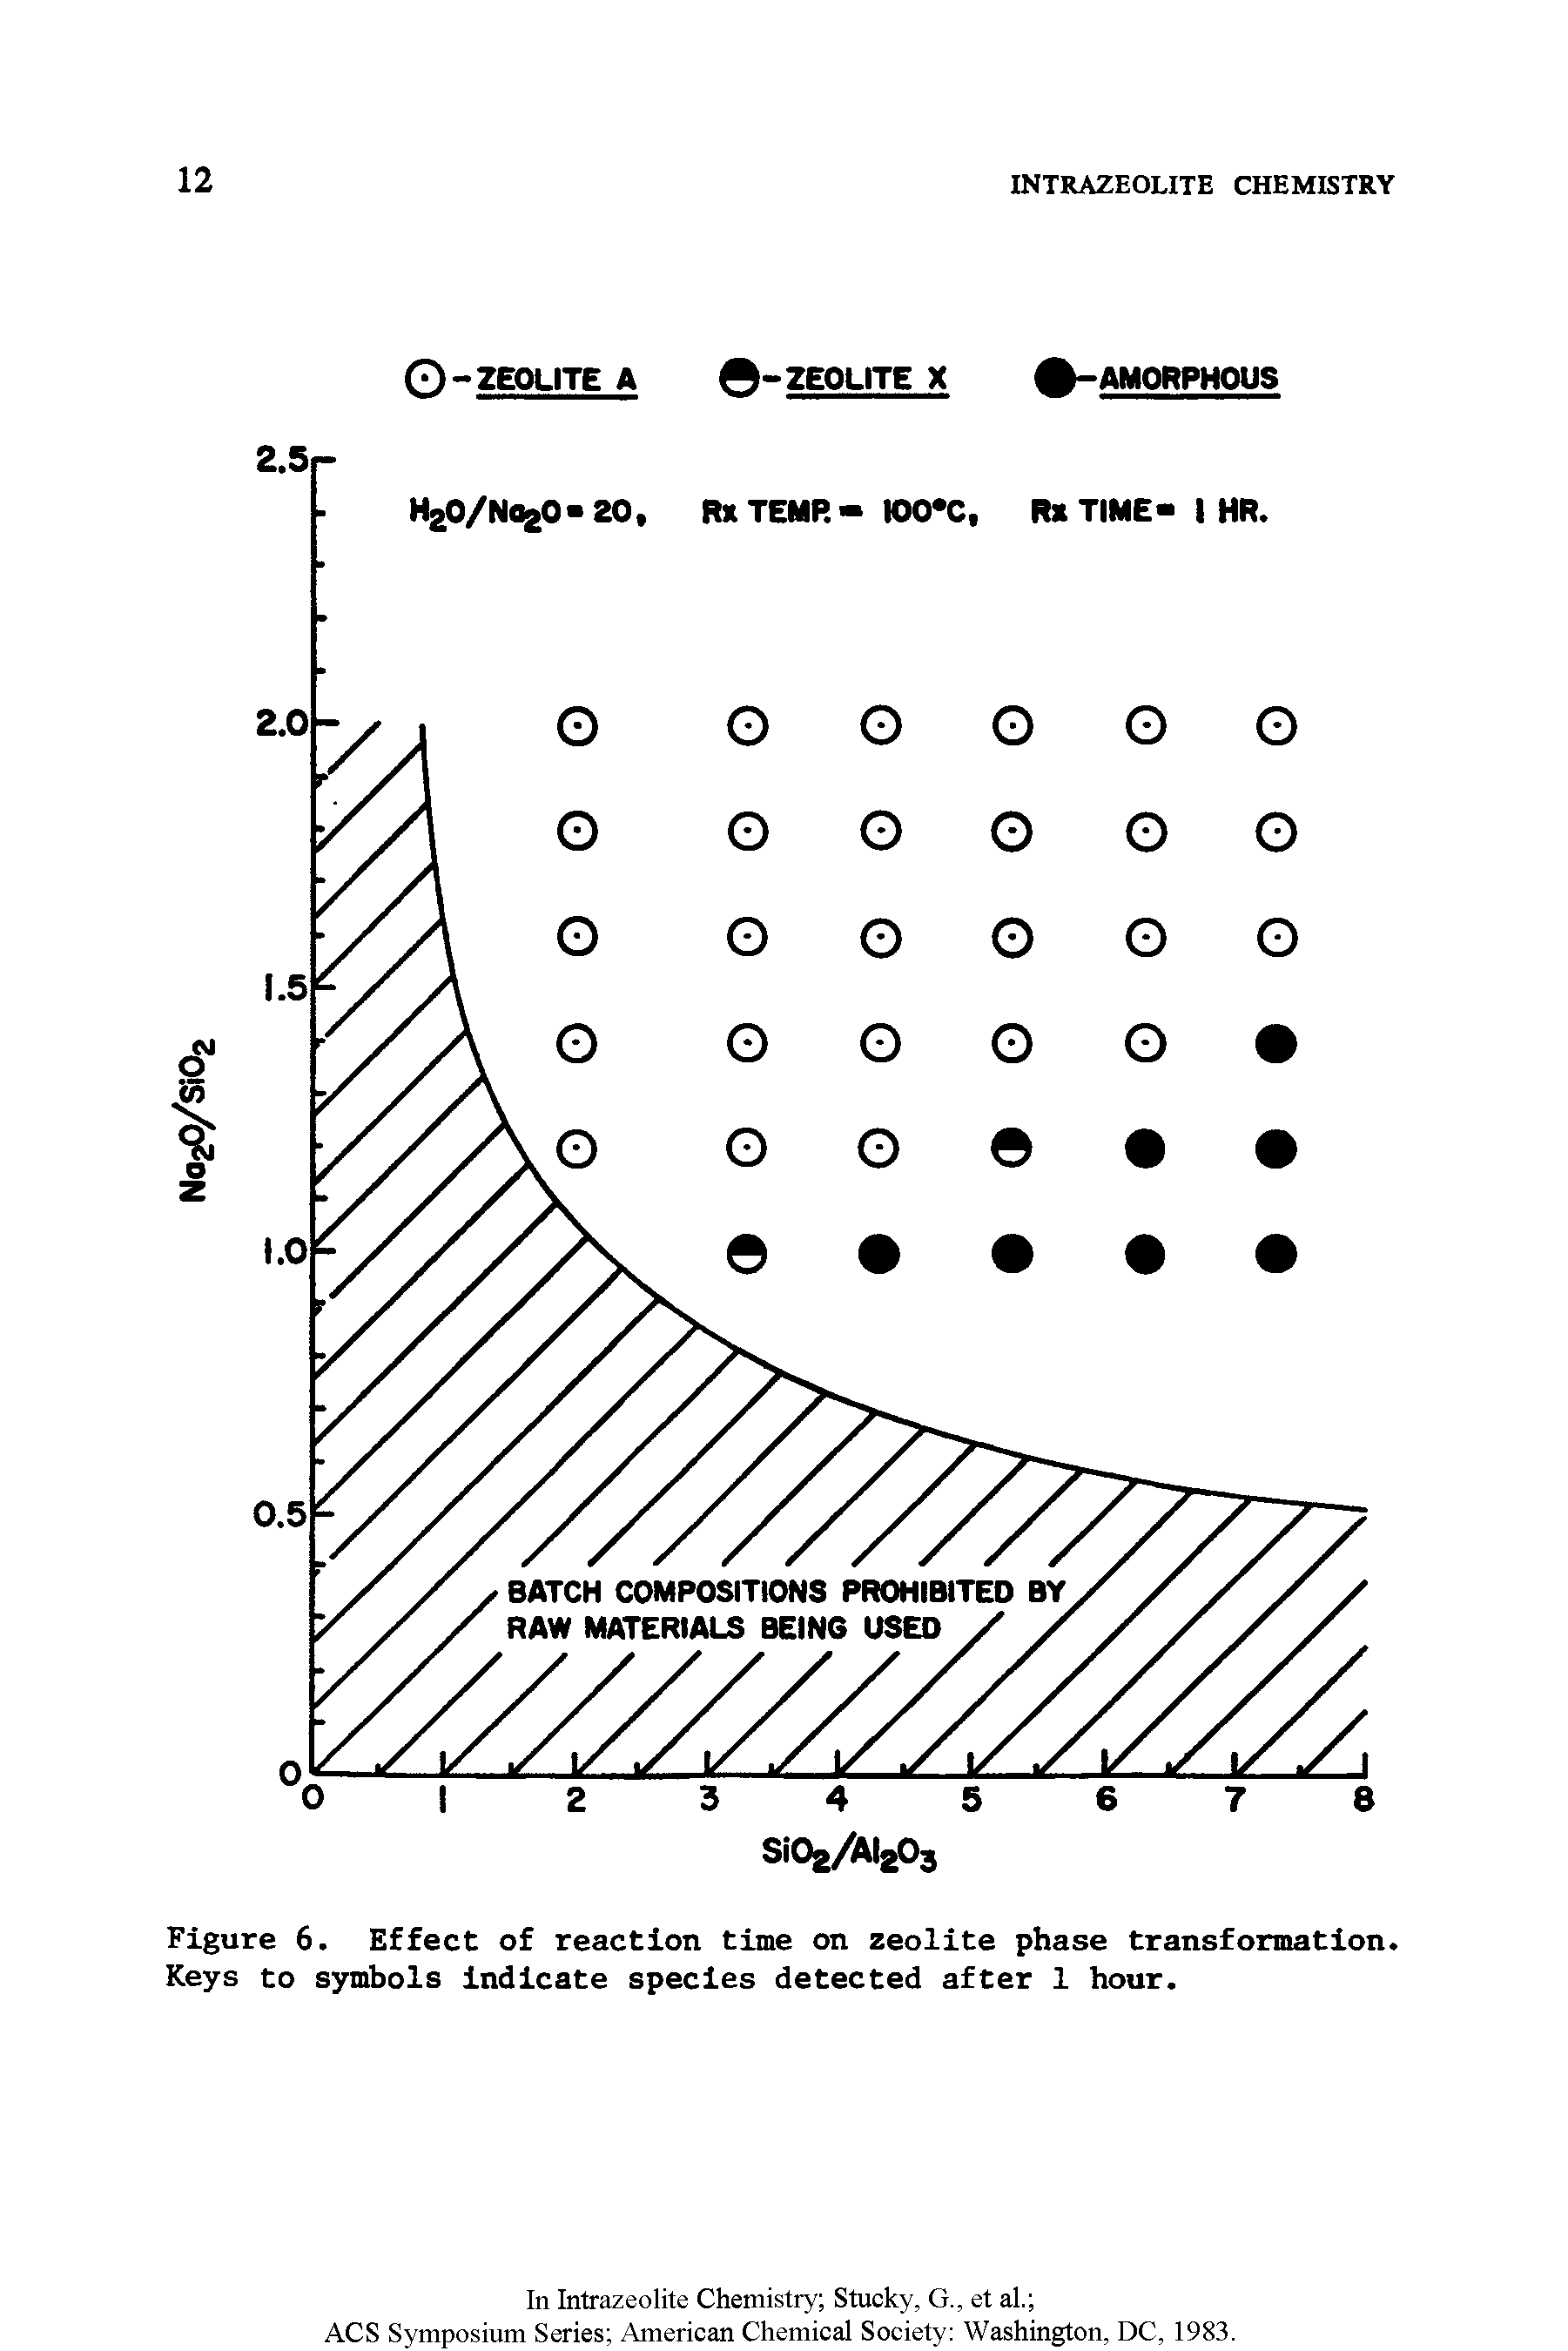 Figure 6. Effect of reaction time on zeolite phase transformation. Keys to symbols indicate species detected after 1 hour.